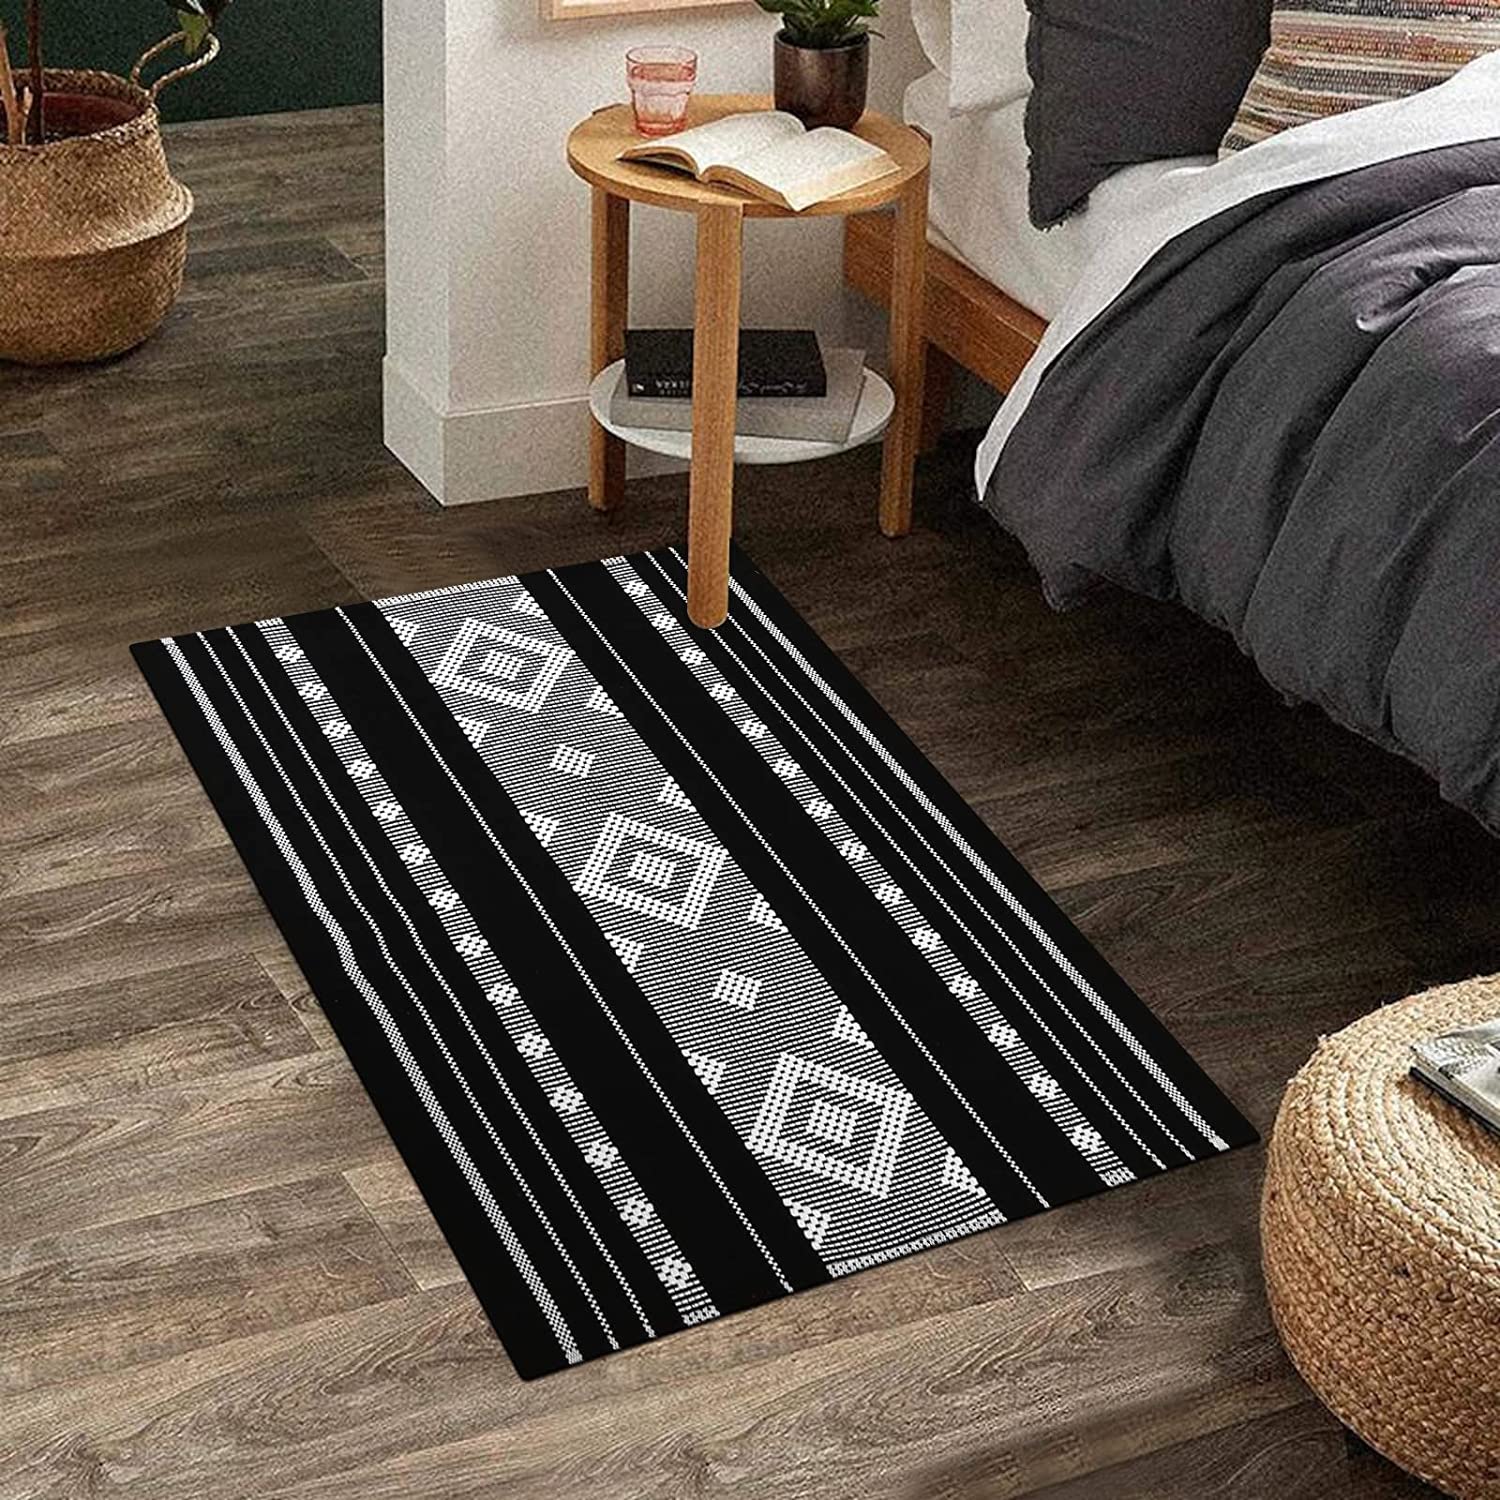 Black and White Striped Outdoor Rug Runner 24